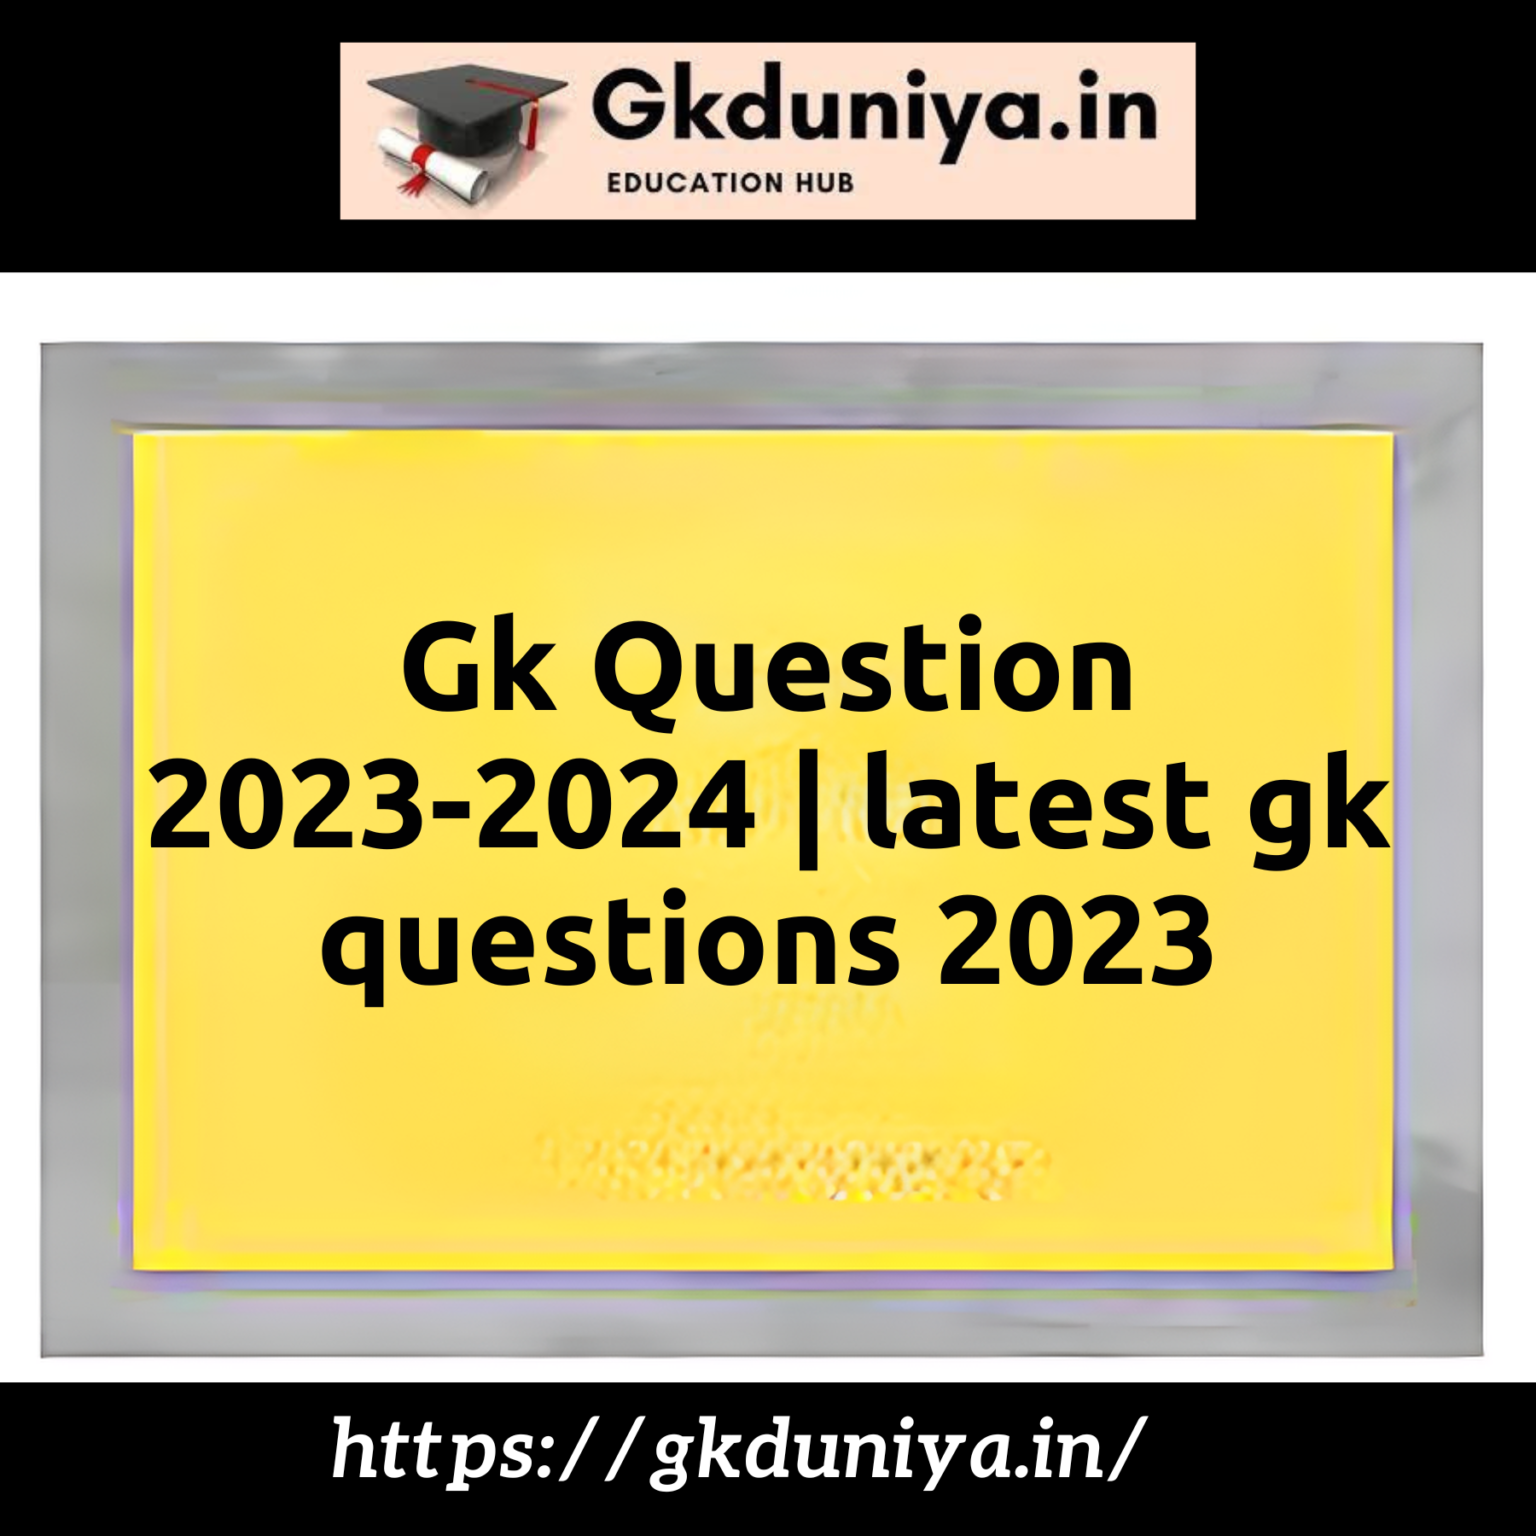 Gk Question 2023 2024 Latest Gk Questions 2023 5 1536x1536 